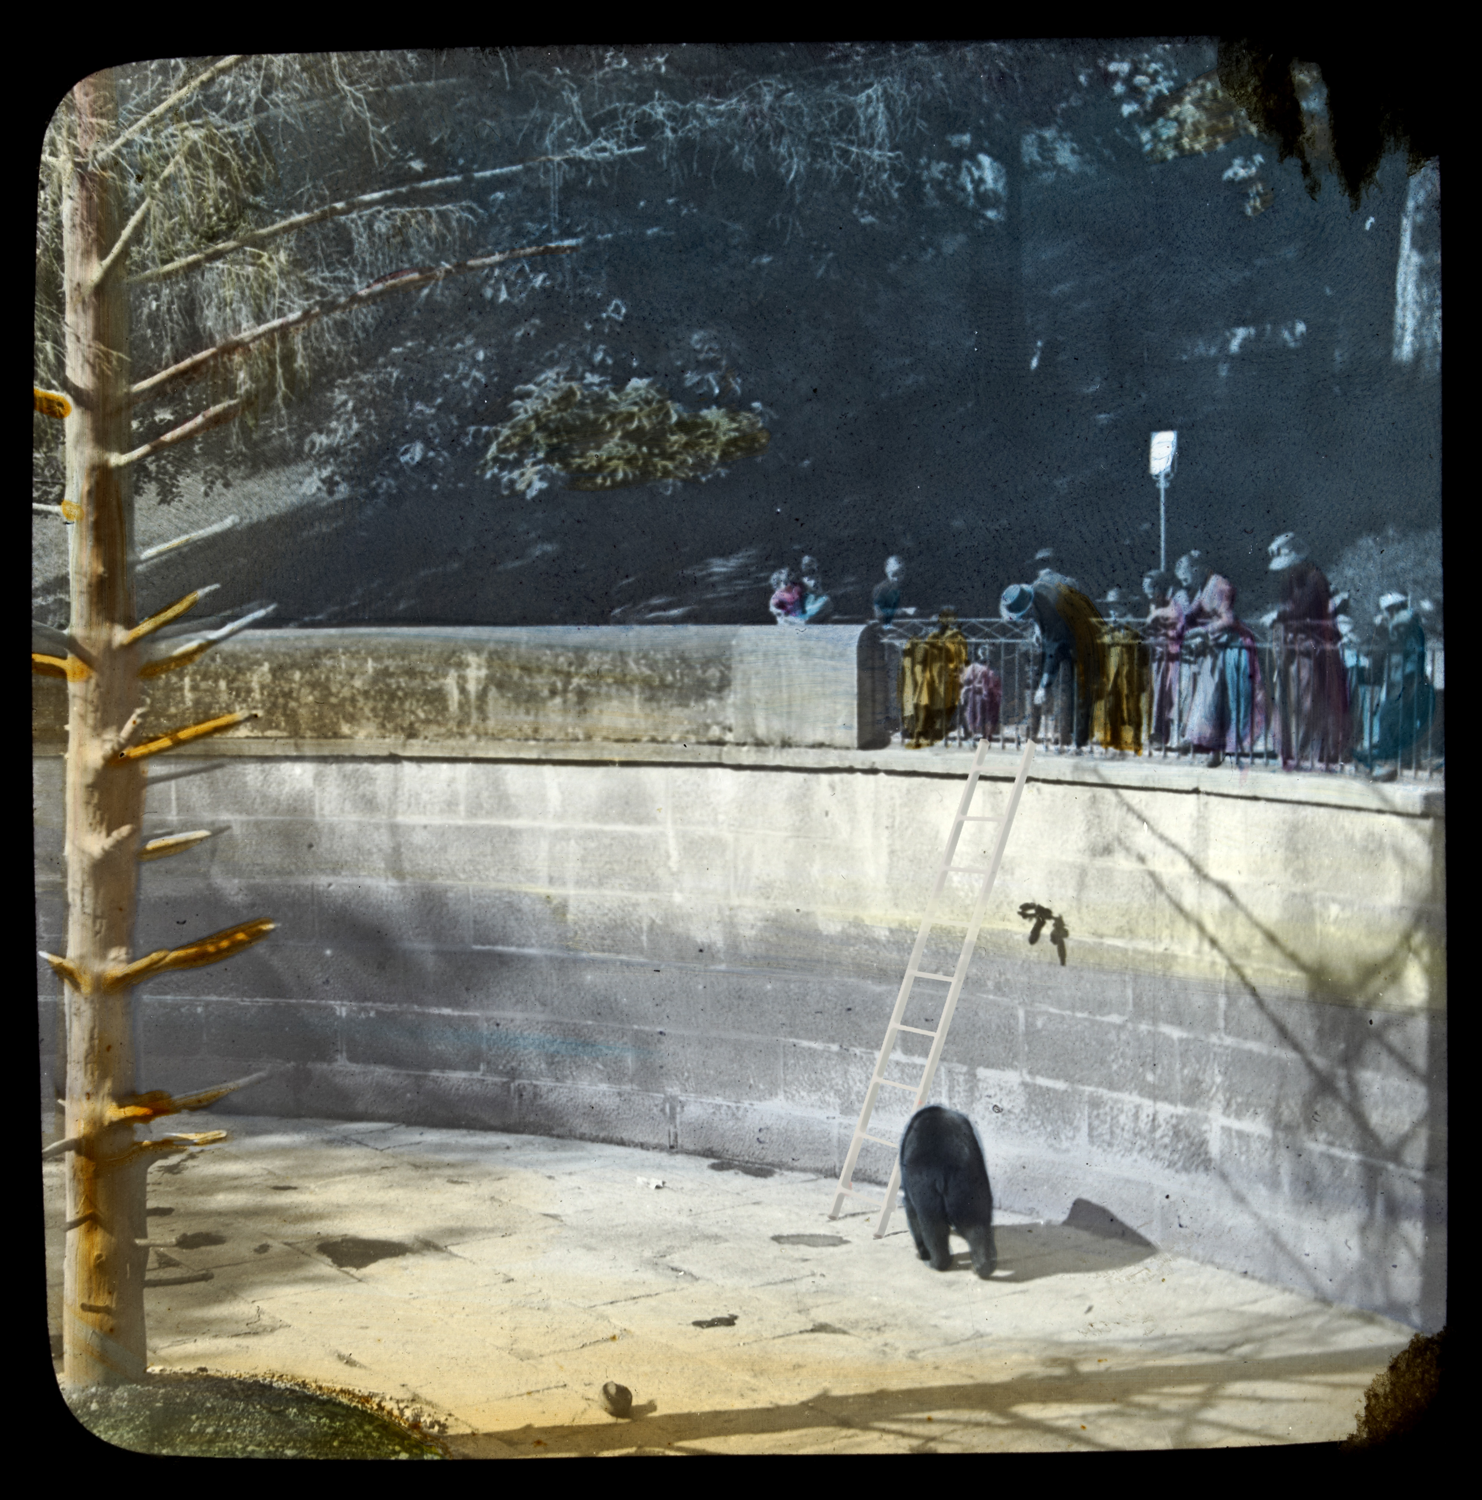 Archival image of a bear digitally altered to include a ladder